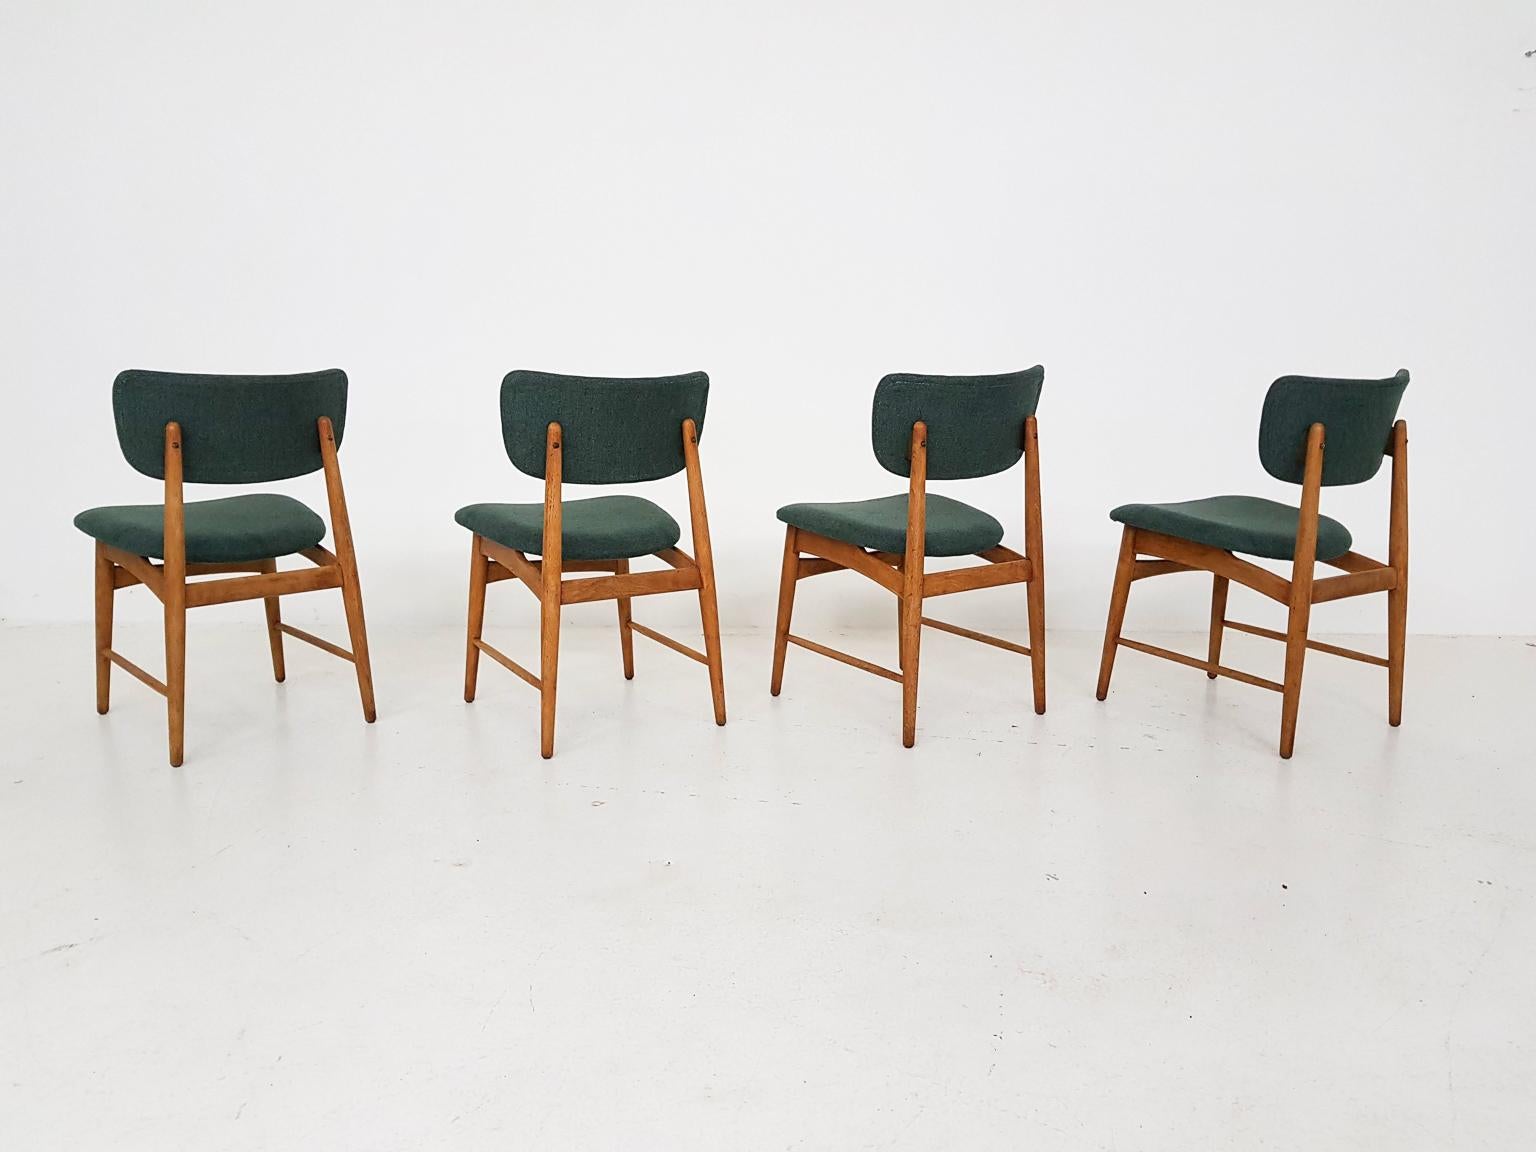 Dutch Set of 4 Oak Dining Room Chairs Attributed to Bovenkamp, The Netherlands, 1960s For Sale